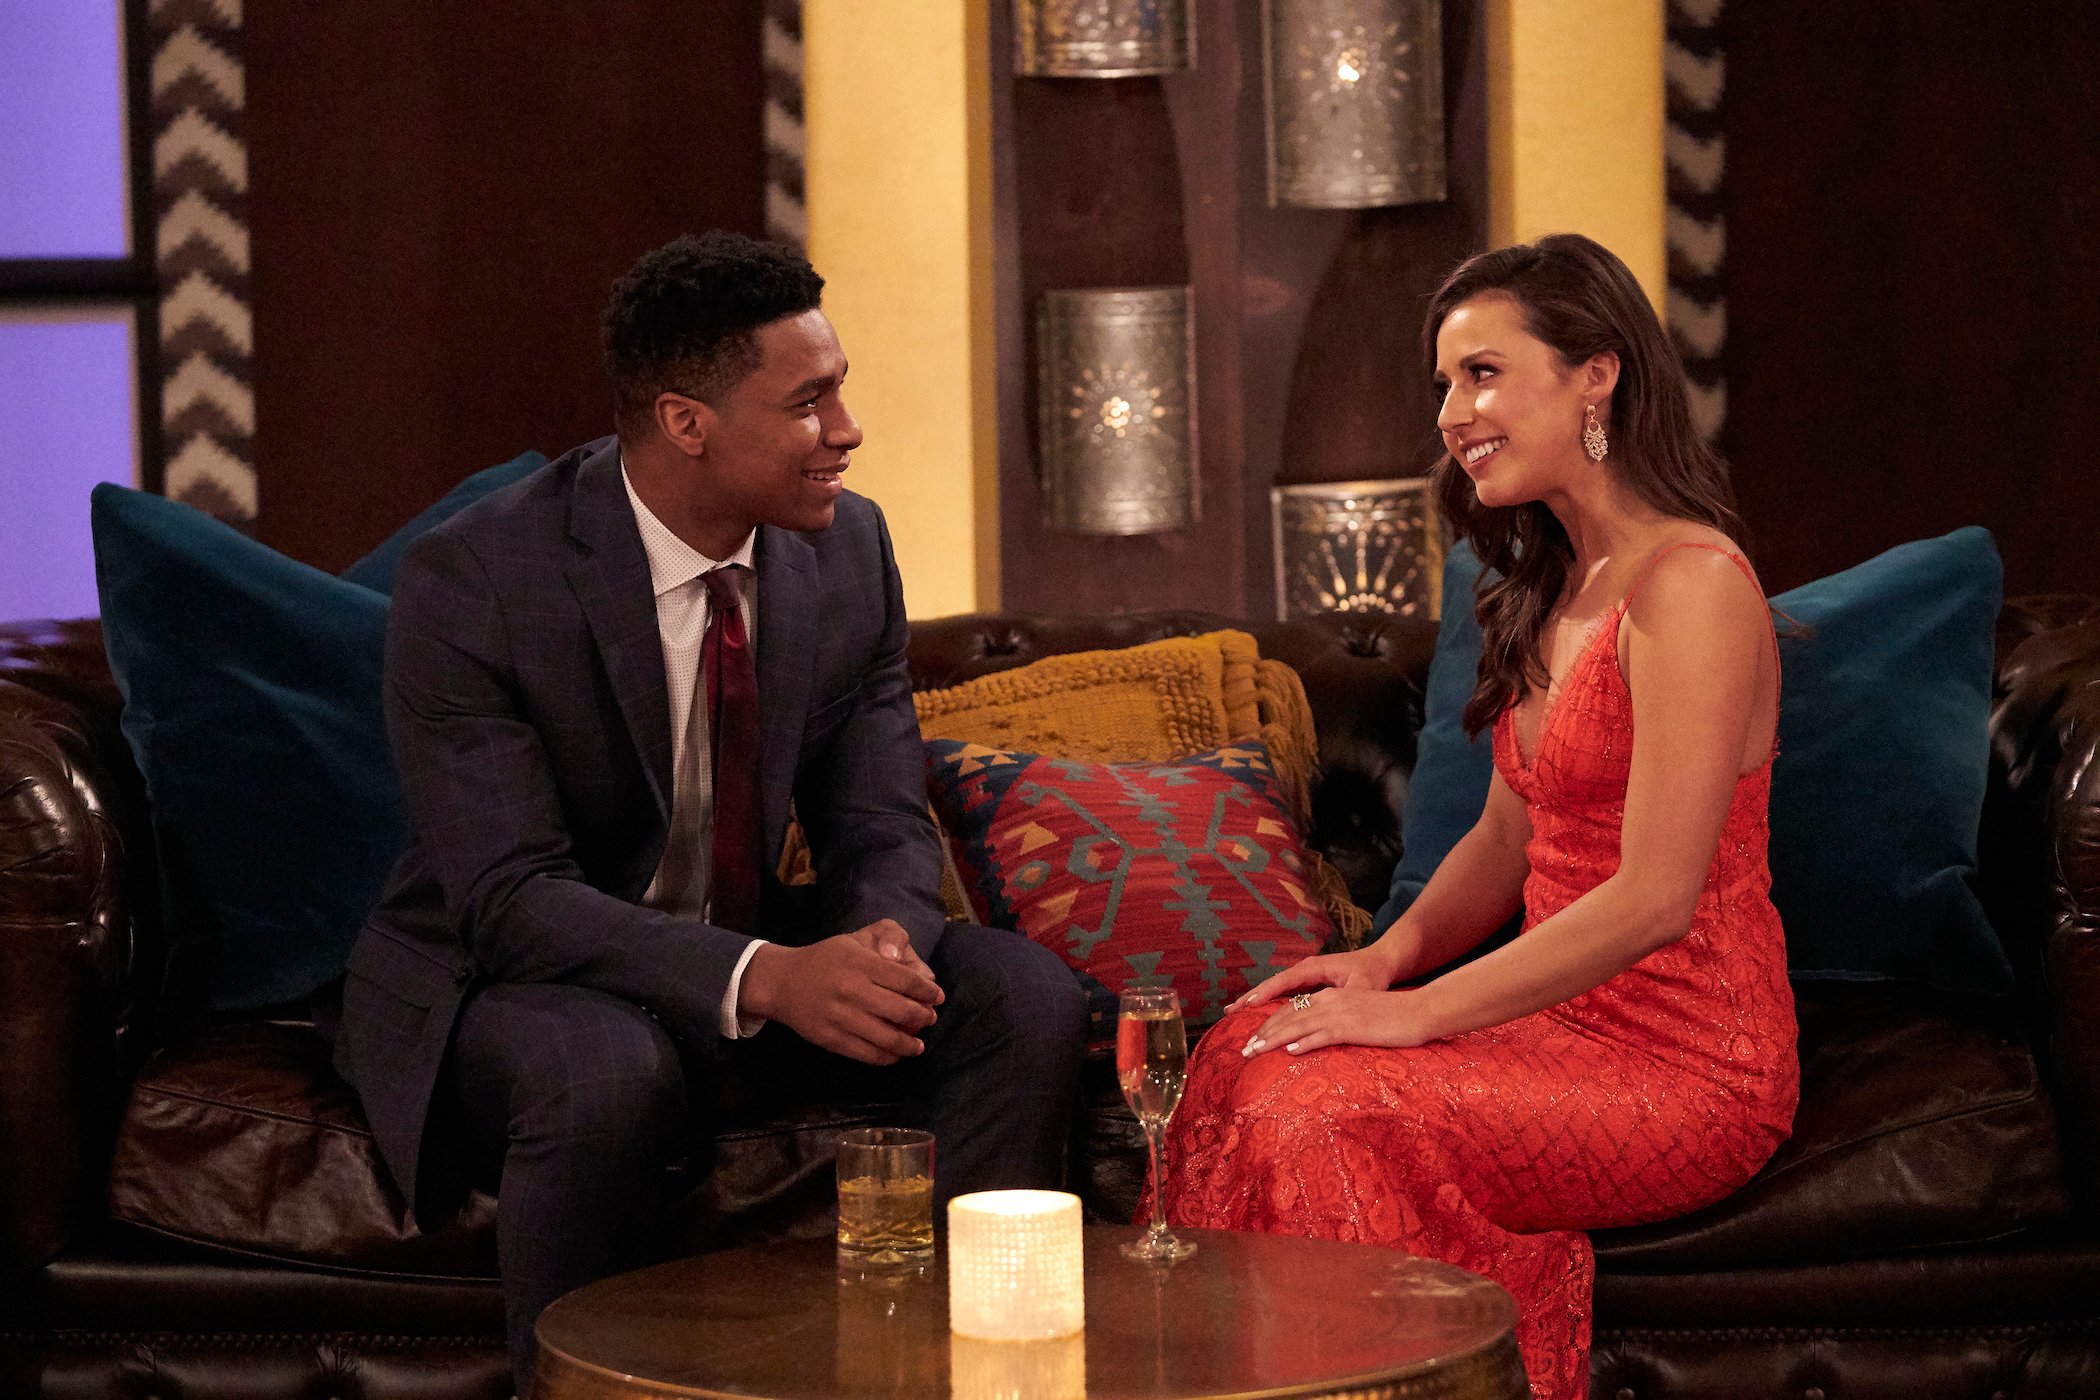 Katie Thurston from 'The Bachelor' sitting with a contestant on 'The Bachelorette'